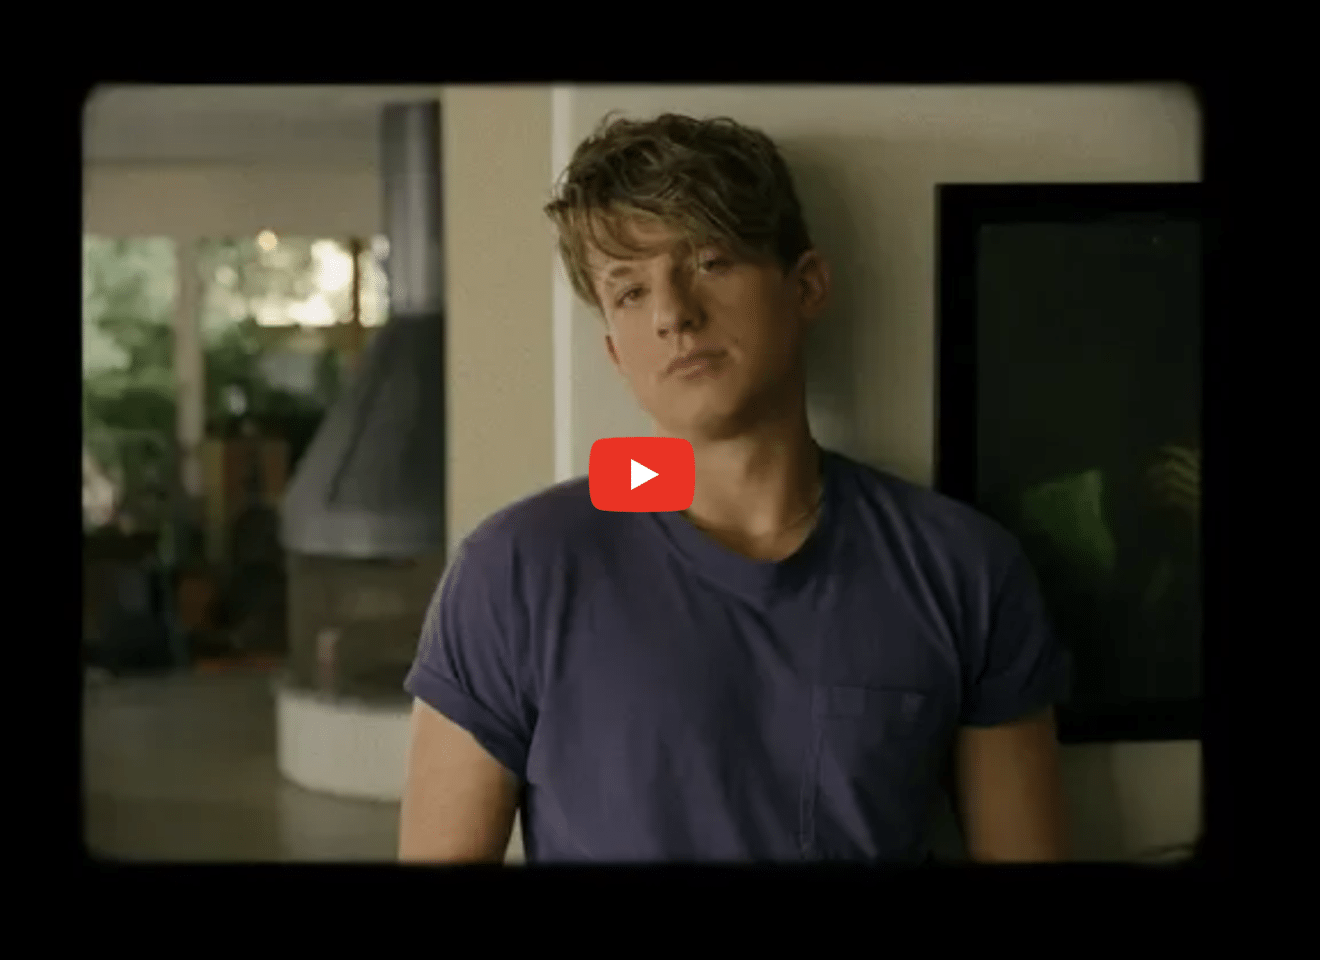 Charlie Puth – “The Way I am” [Official Video]